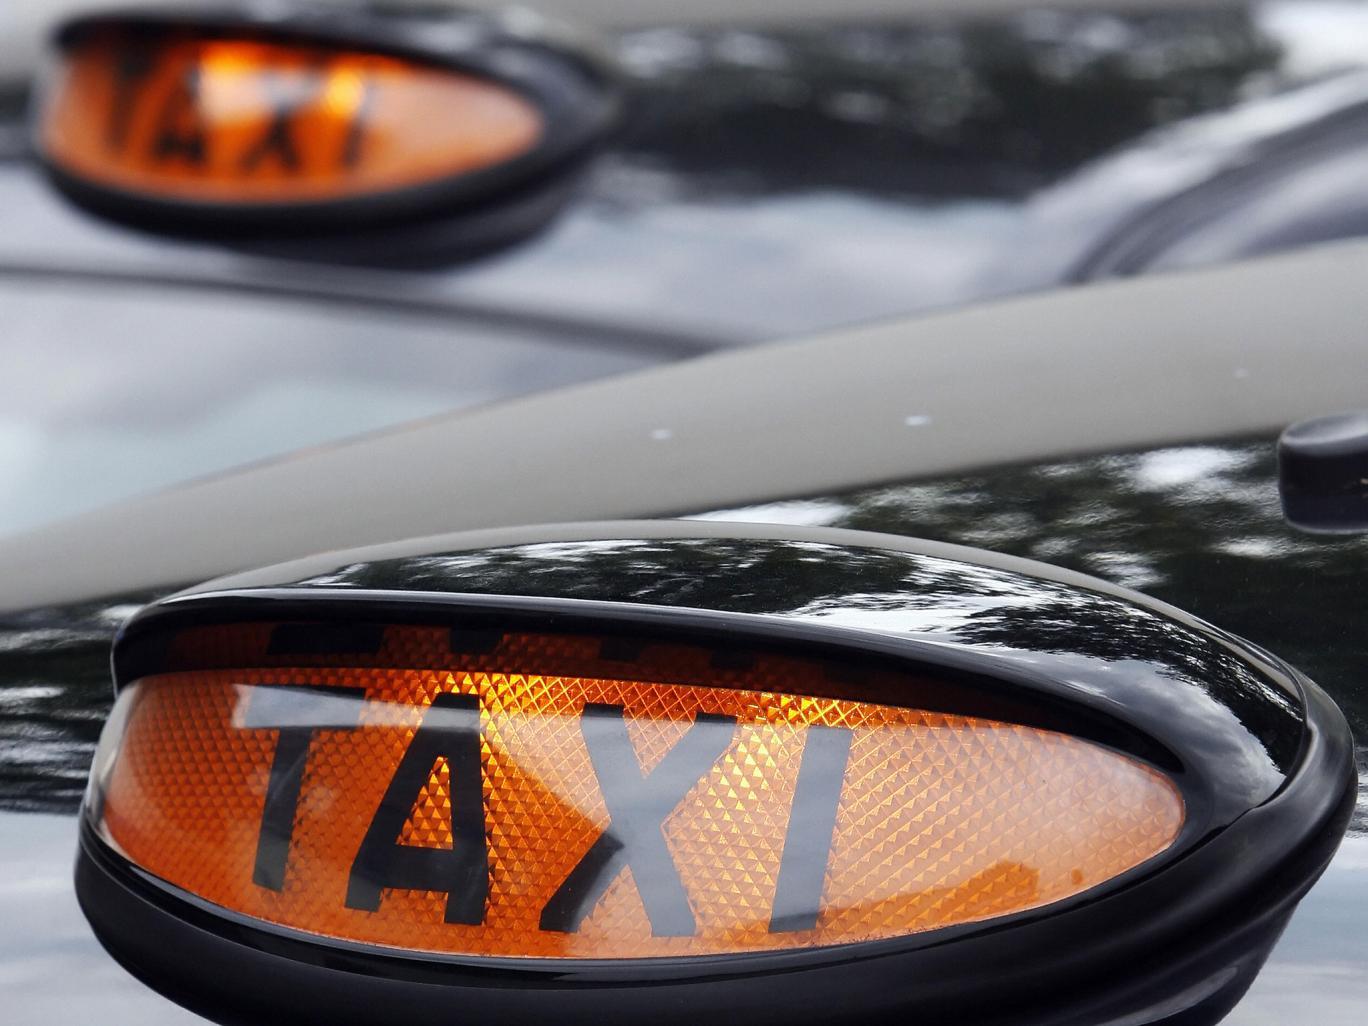 One in five drivers applying for a taxi licence in the region over the last two years had a criminal record, with six councils granting or renewing permits for more than 300 convicted drivers since 2012